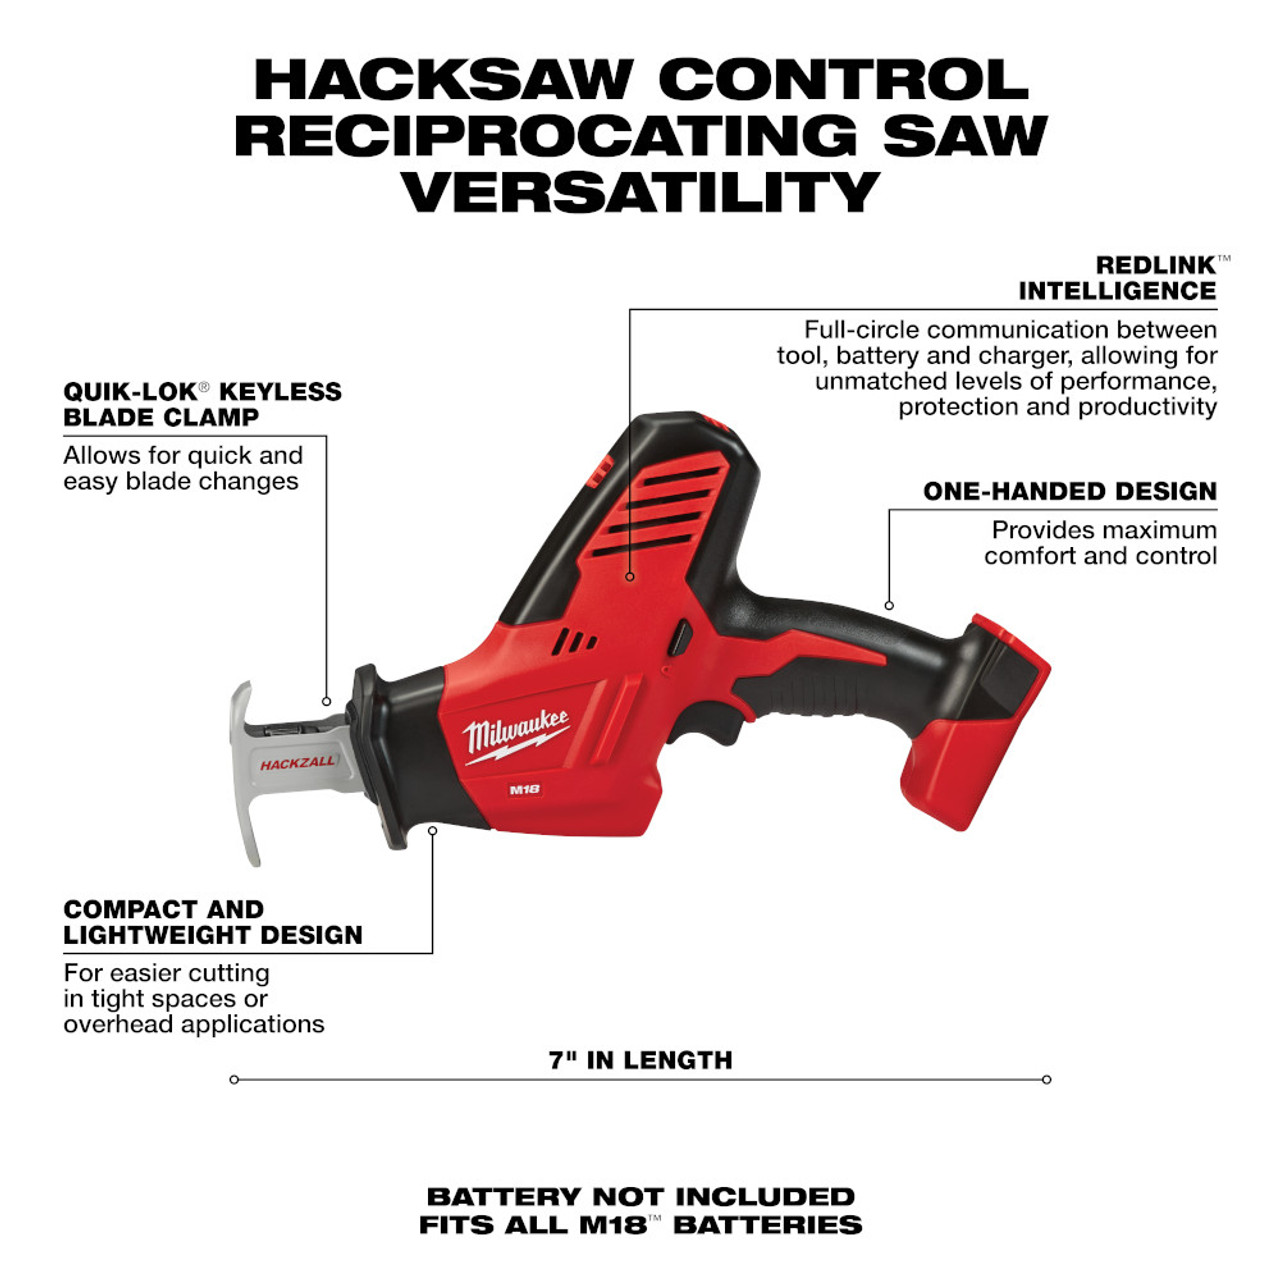 Milwaukee 2625-21 M18 18V Hackzall Cordless One-Handed Reciprocating Saw Kit - 1